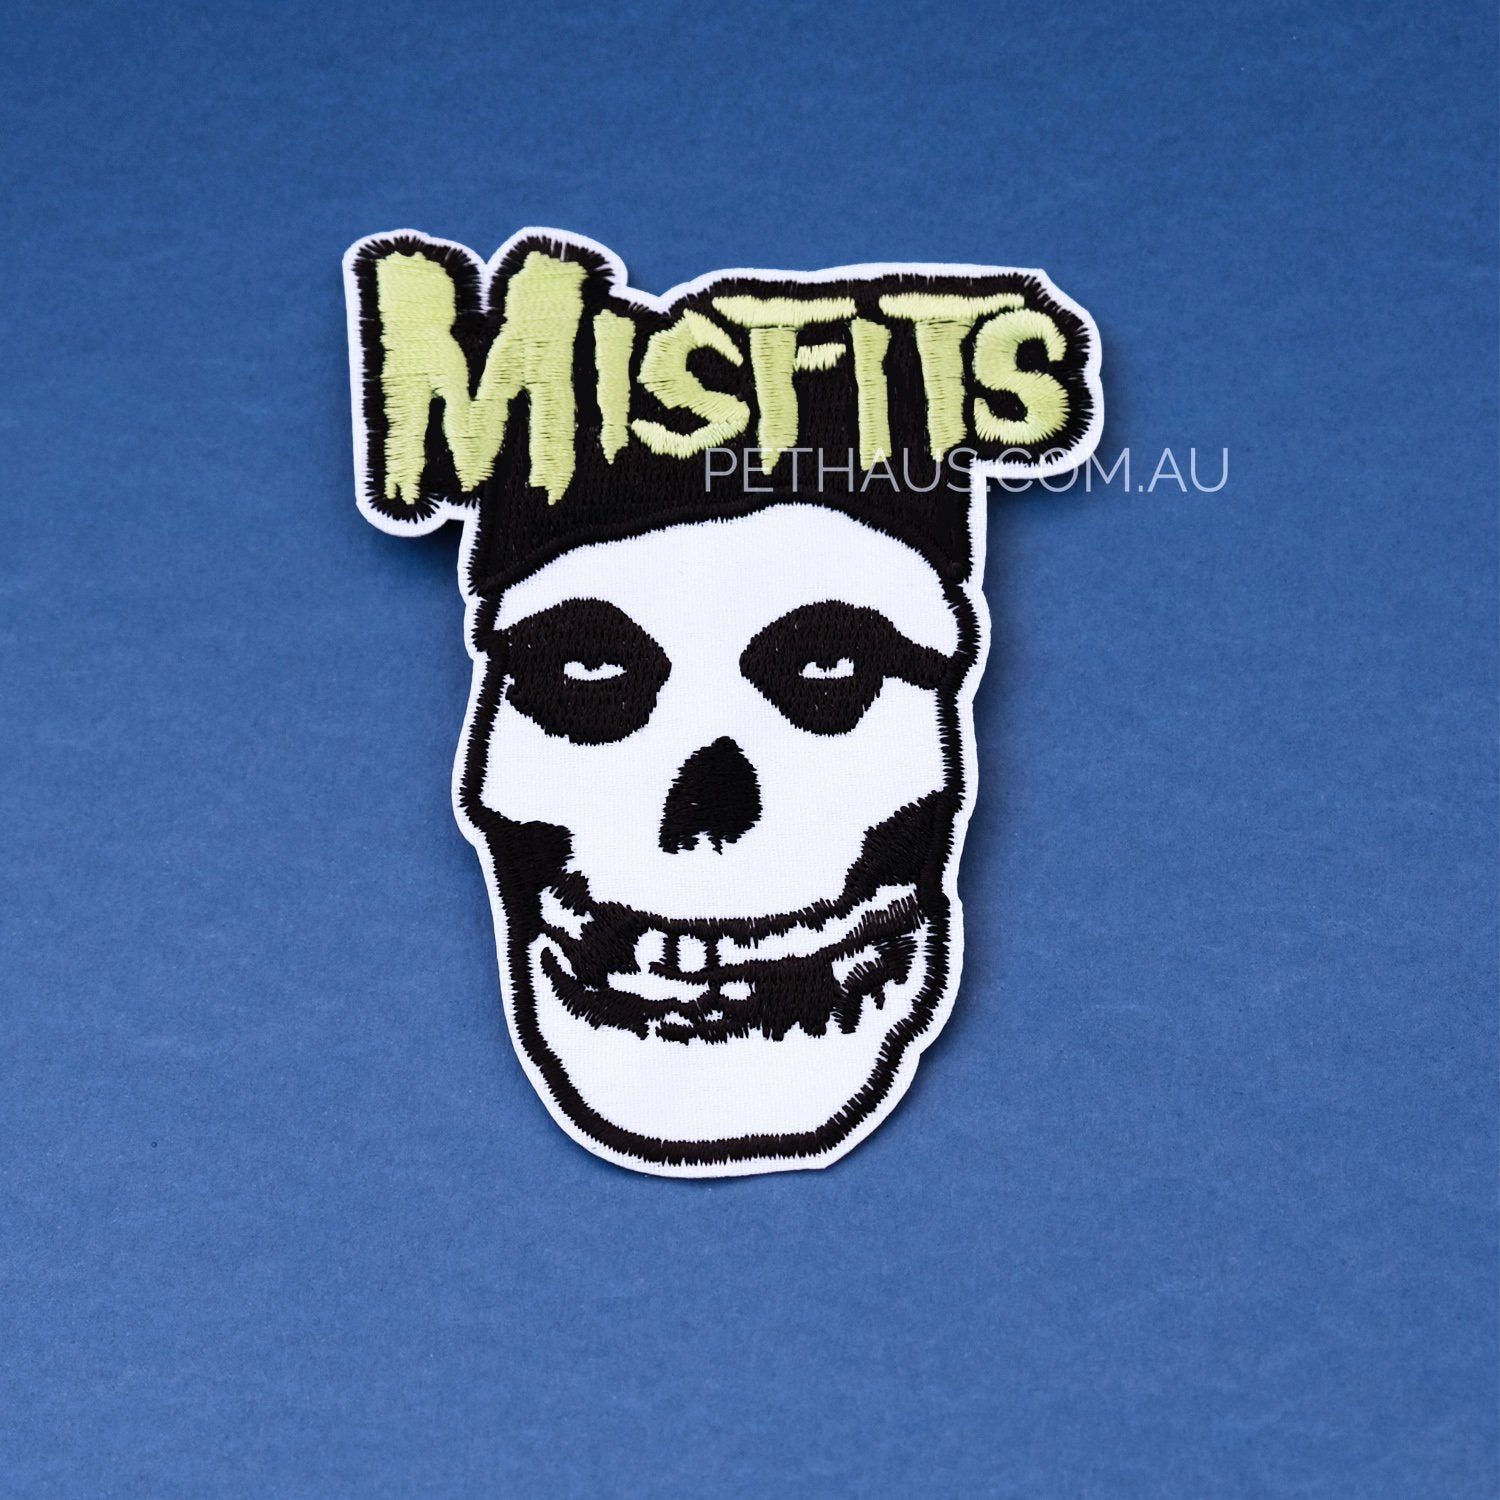 Misfits embroidered patch, band patch, punk patch, rock patch